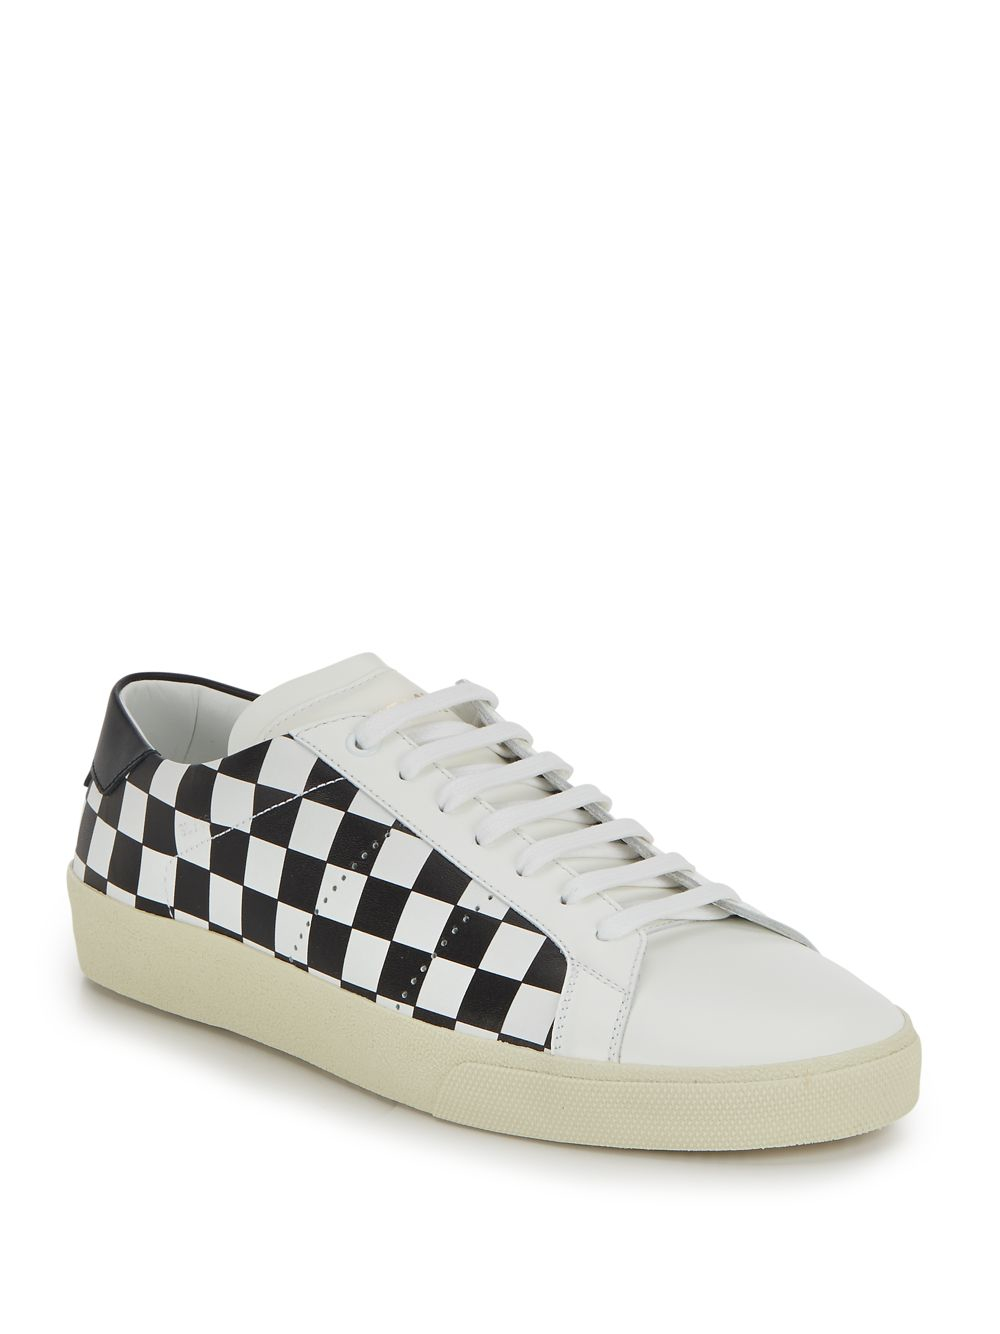 Saint Laurent Checkered Leather Sneakers - Lyst